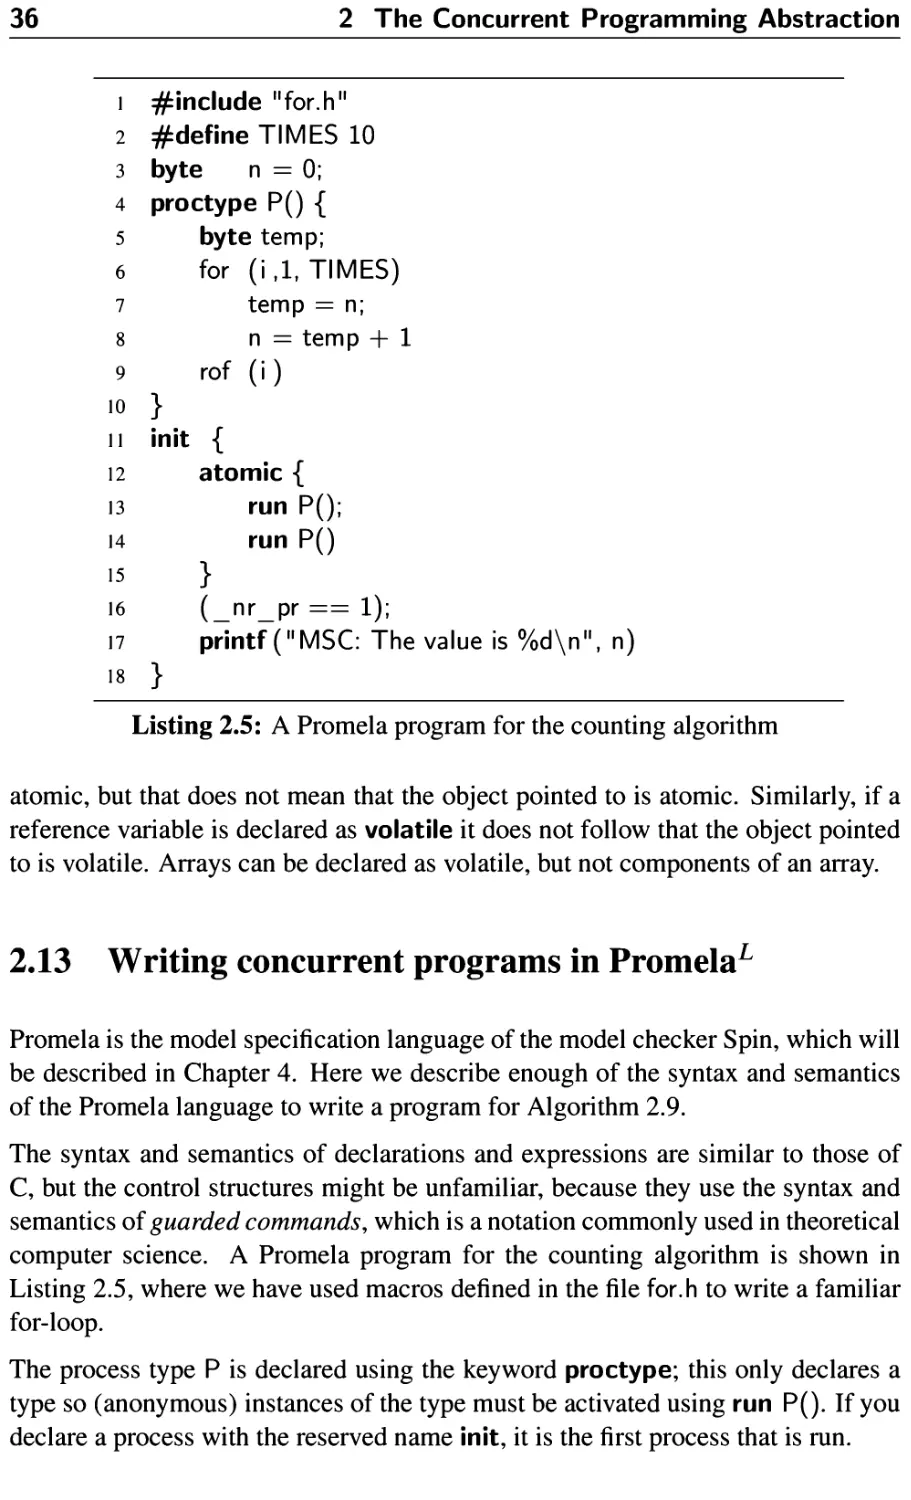 2.13 Writing concurrent programs in Promela